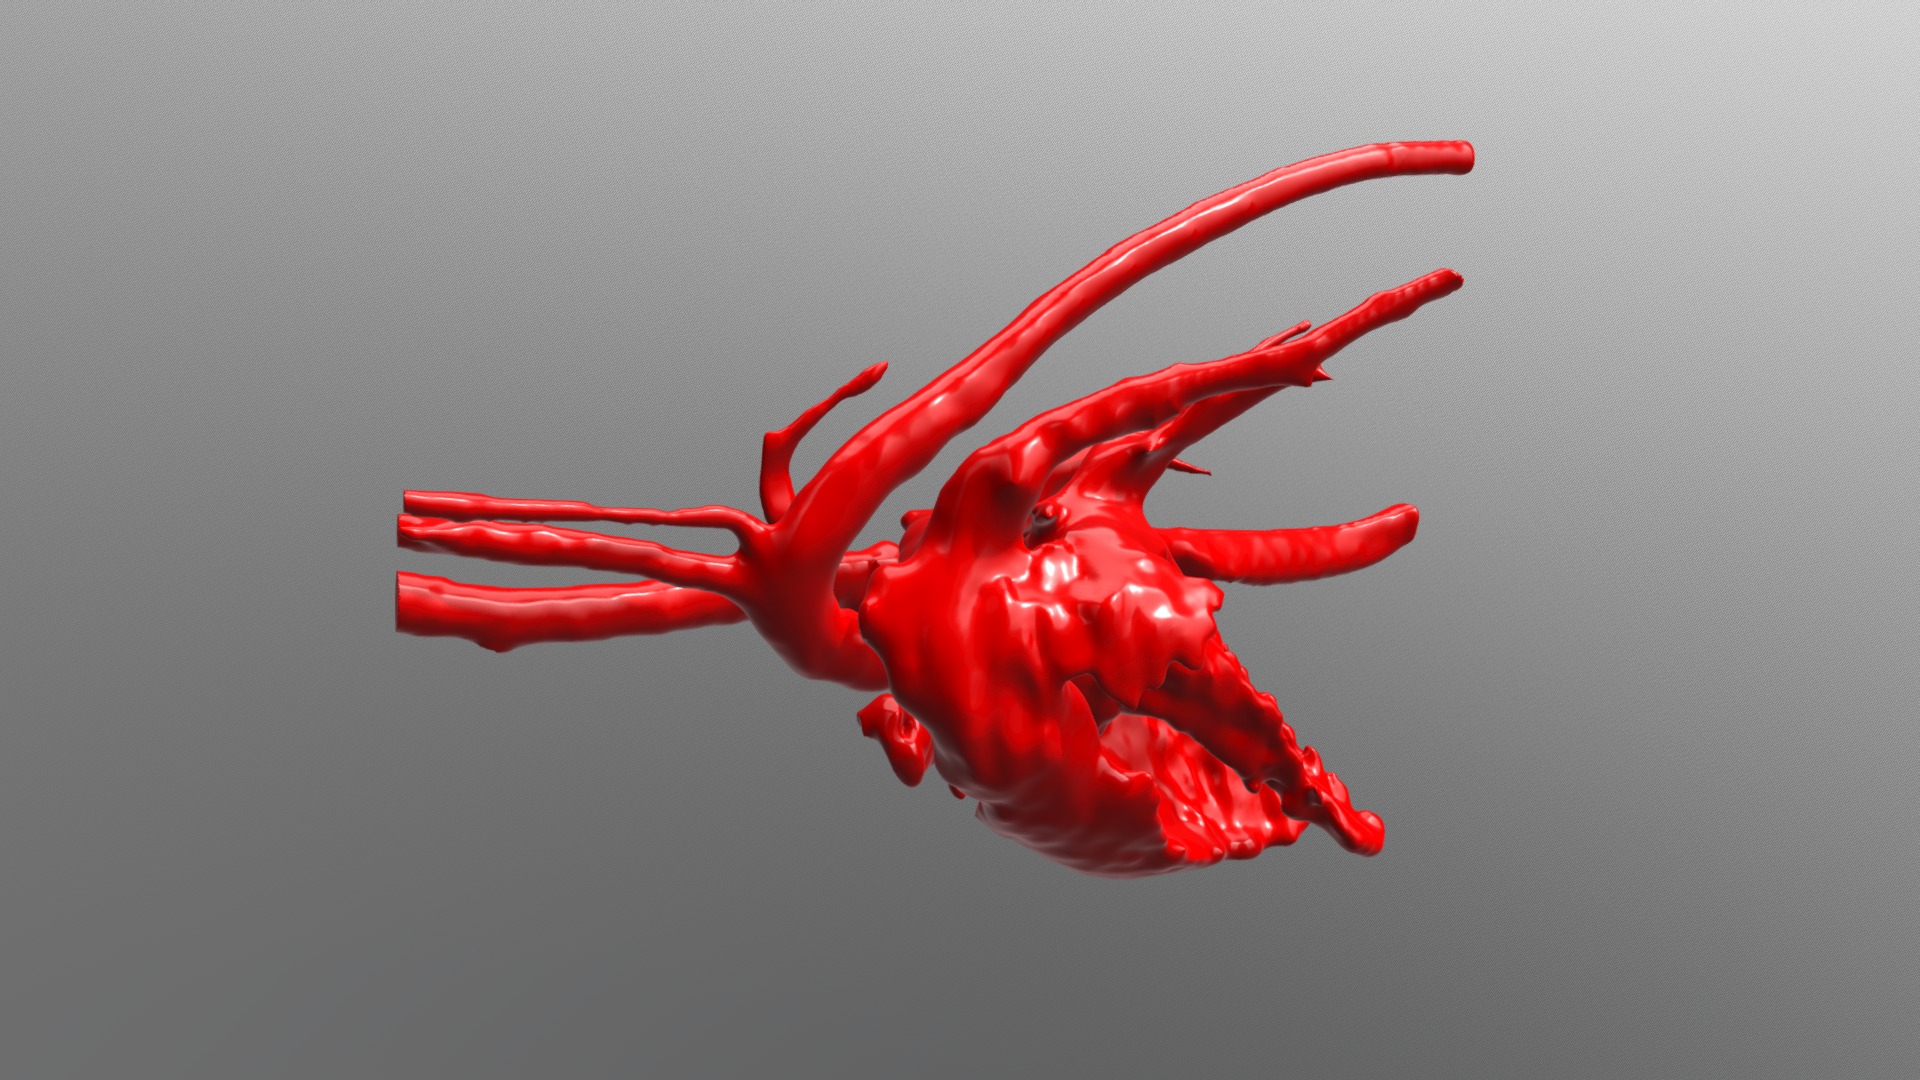 3D model Feline Heart – Normal Blood Volume - This is a 3D model of the Feline Heart - Normal Blood Volume. The 3D model is about a red toy dragon.